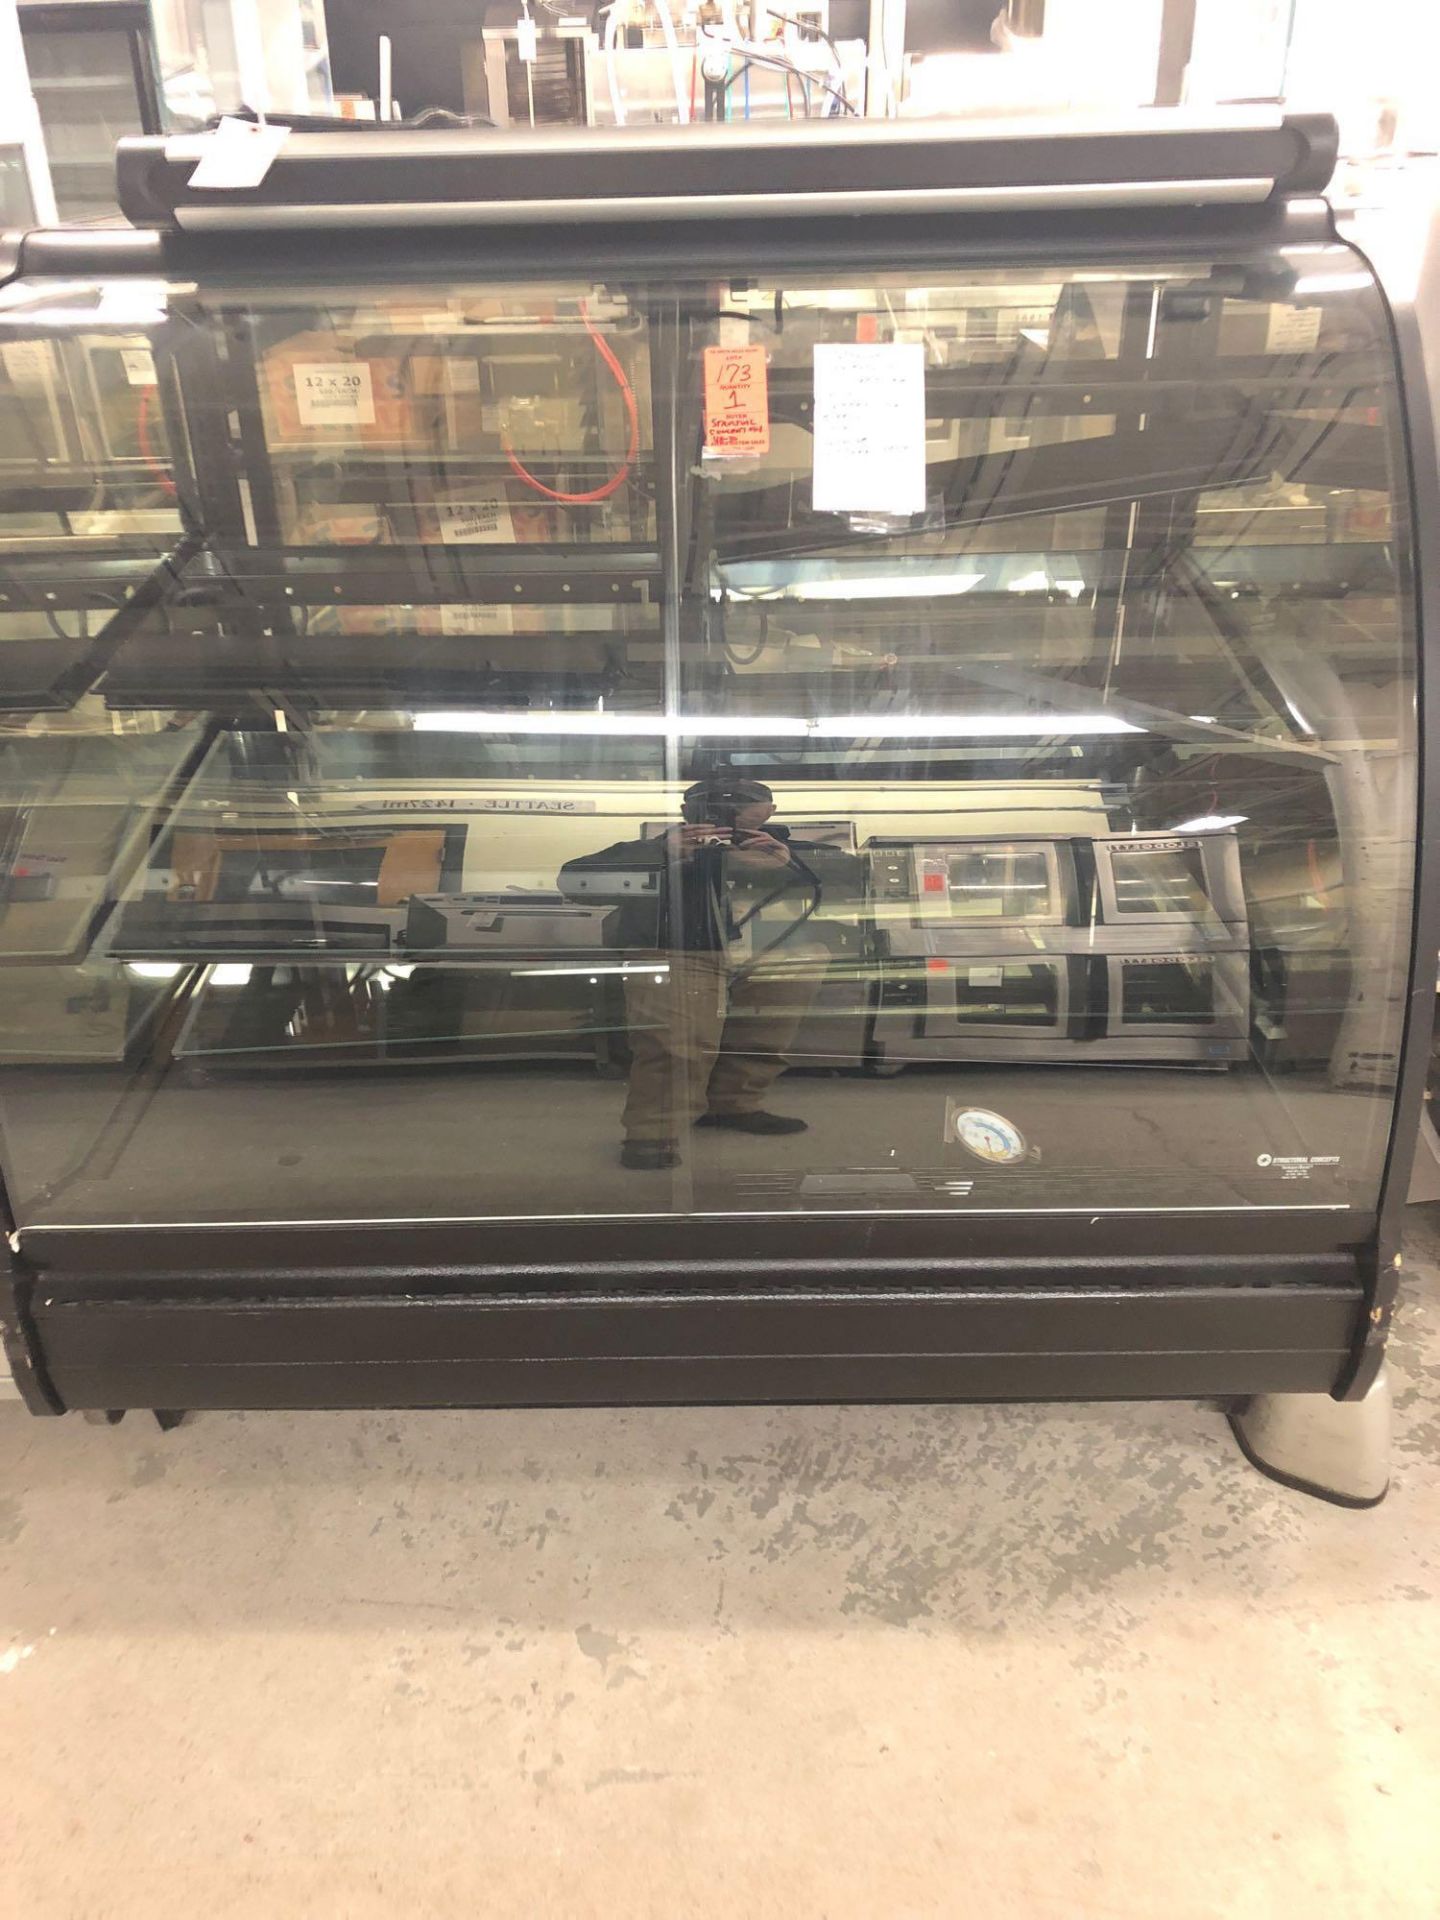 Structural Concepts bakery display case